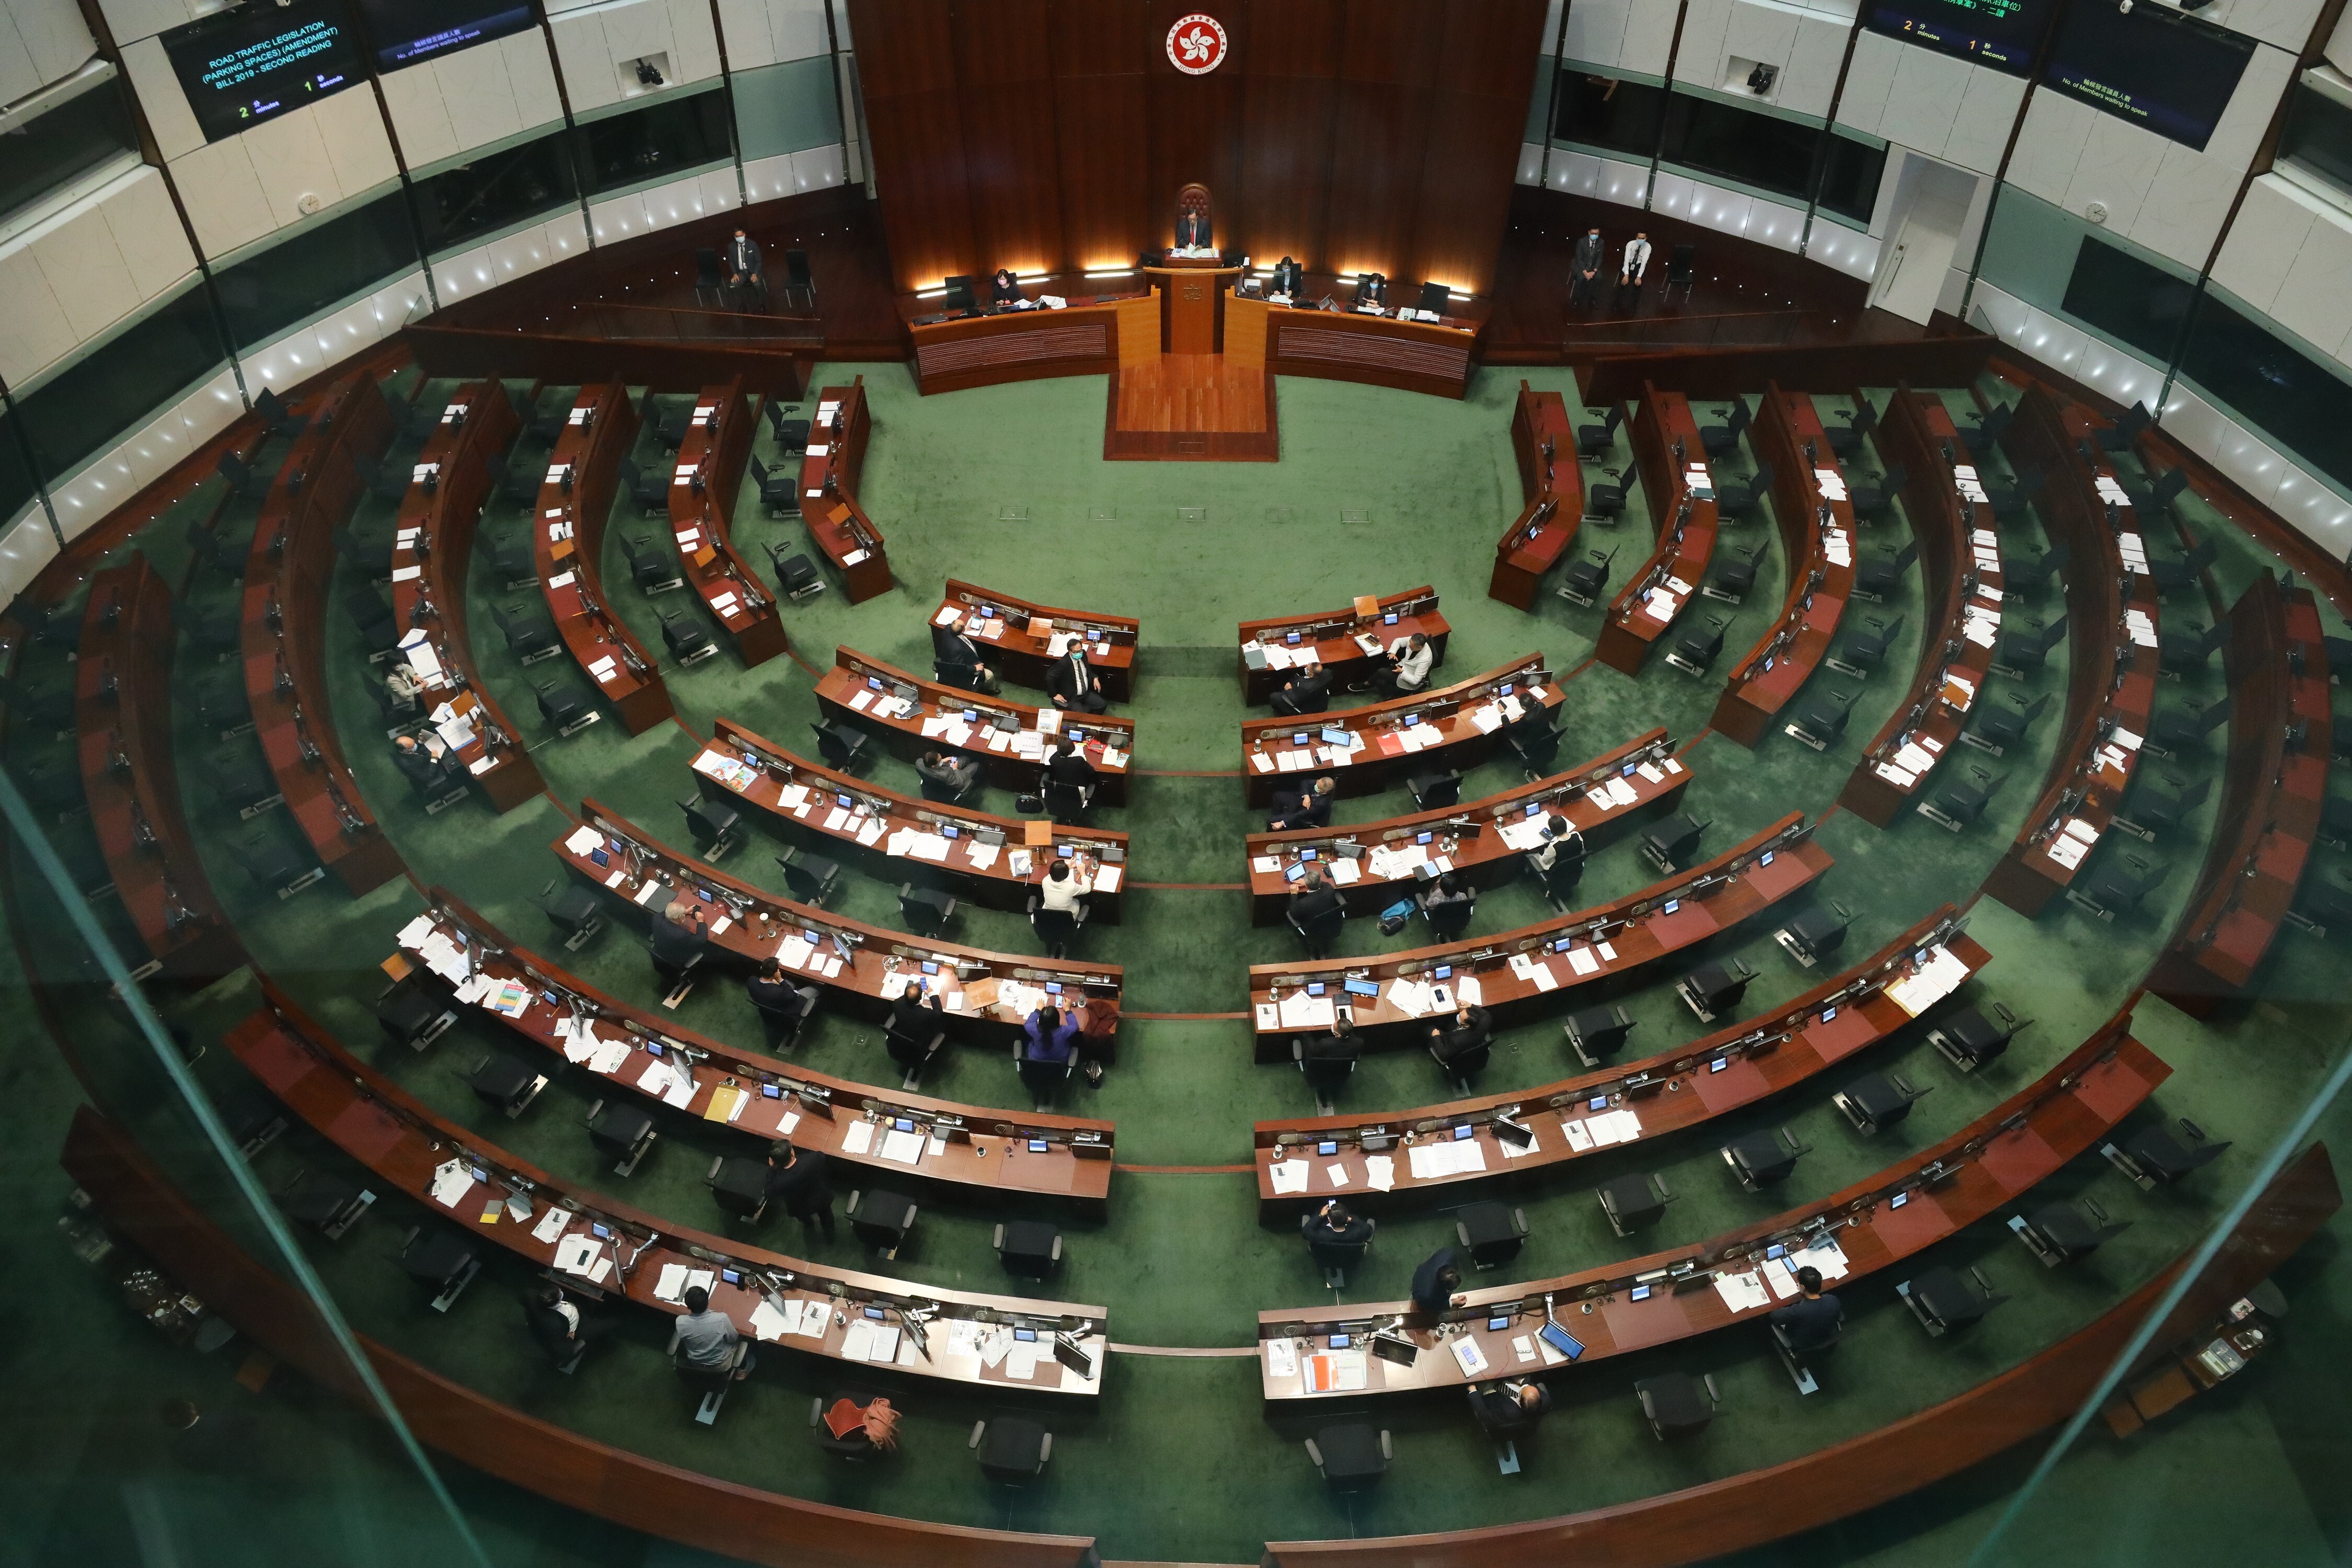 Seats lie empty on the opposition side of the Legislative Council the day after Beijing’s ruling on lawmaker conduct. Photo: Dickson Lee